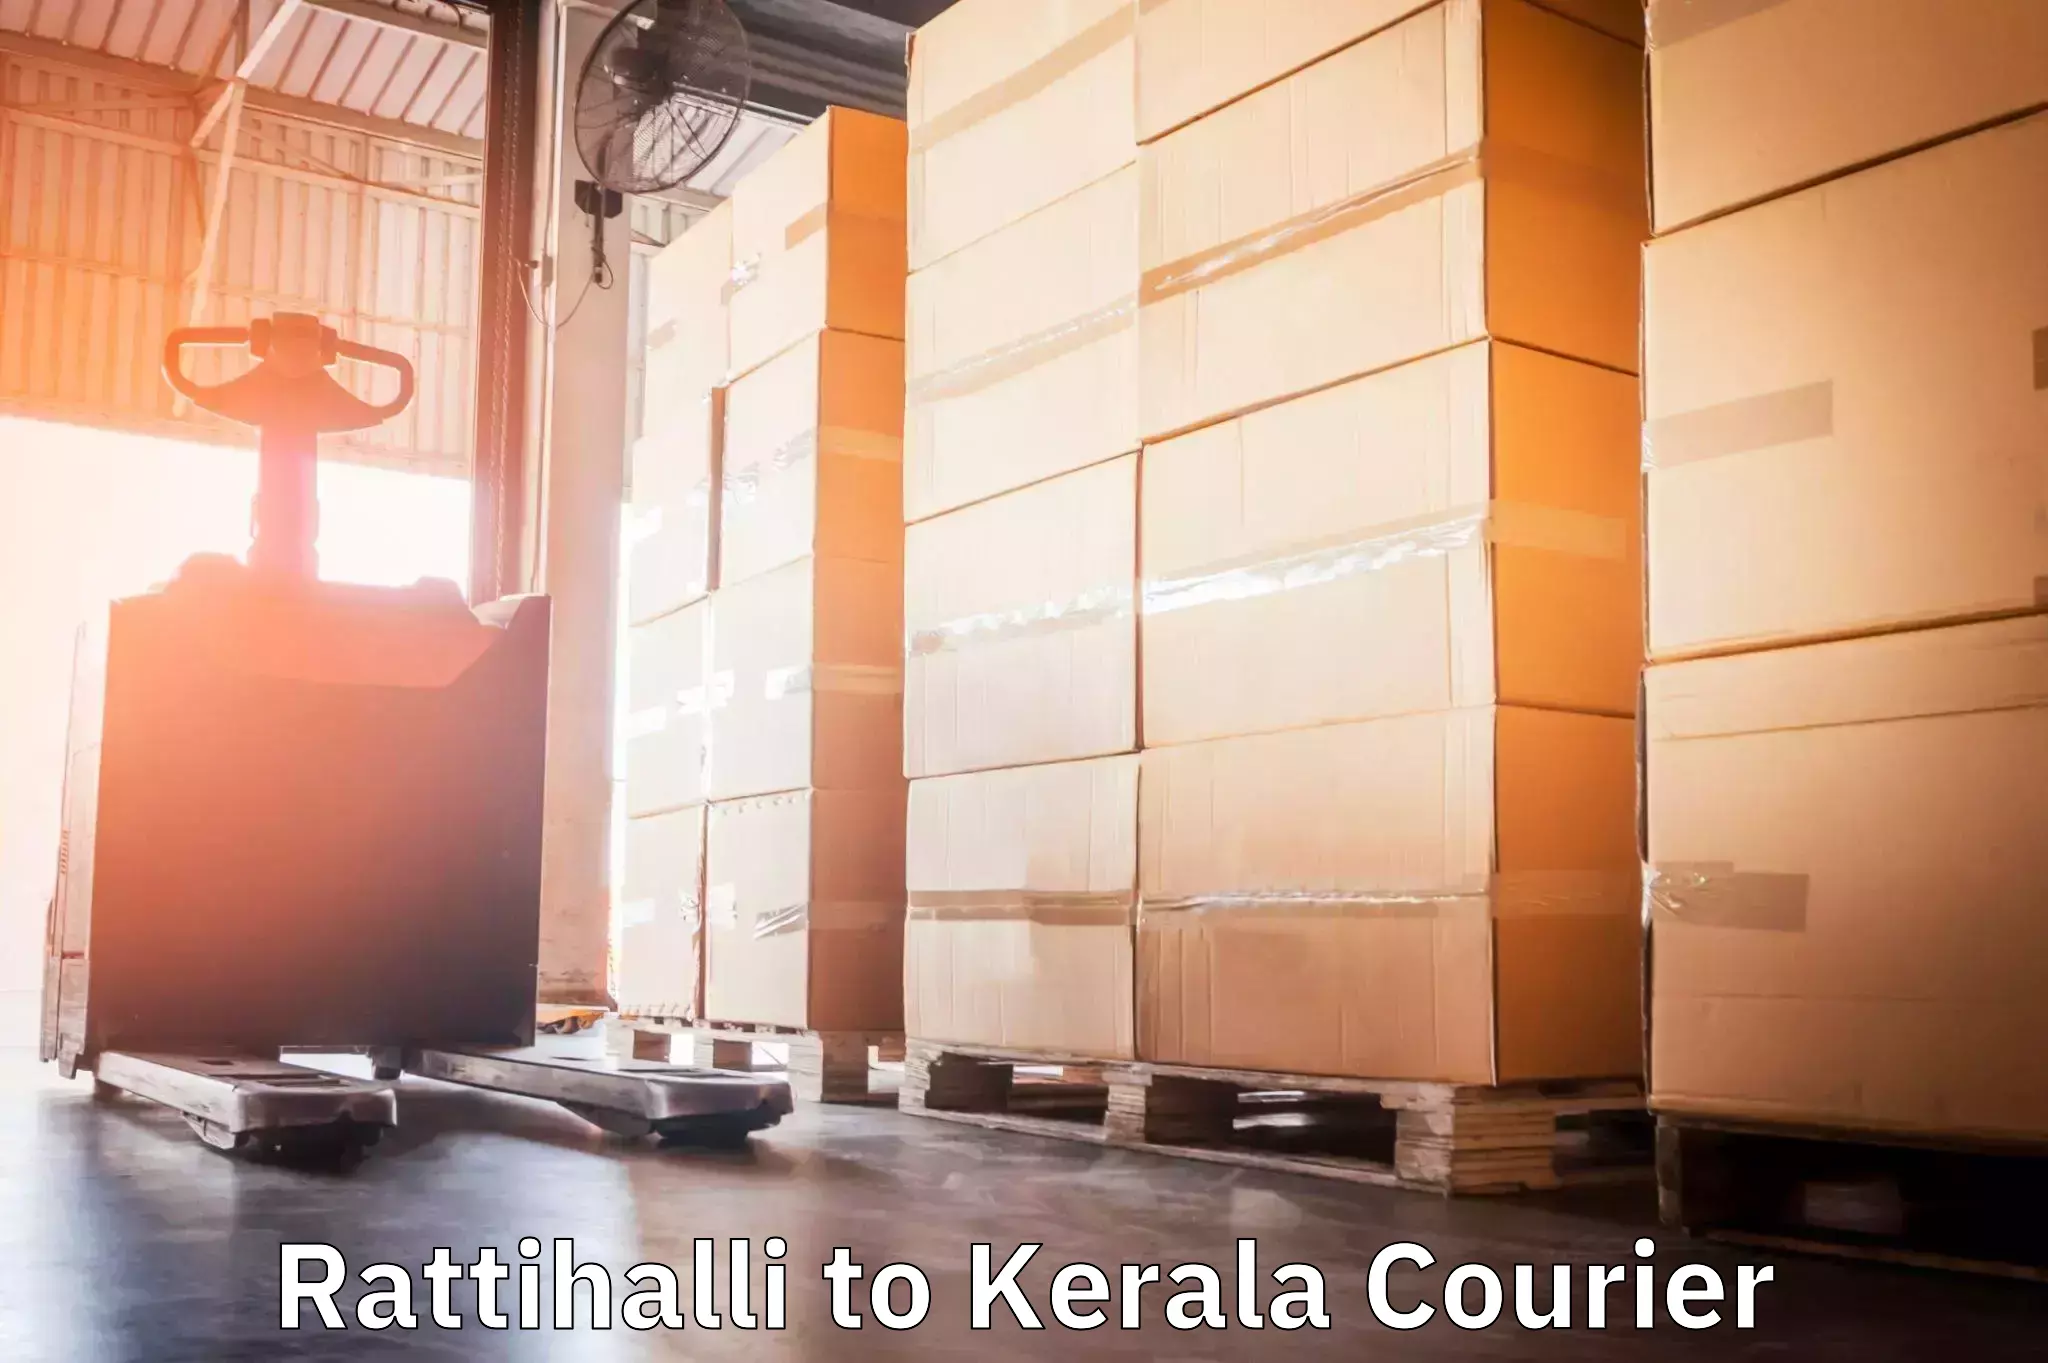 Efficient parcel service Rattihalli to Cochin University of Science and Technology